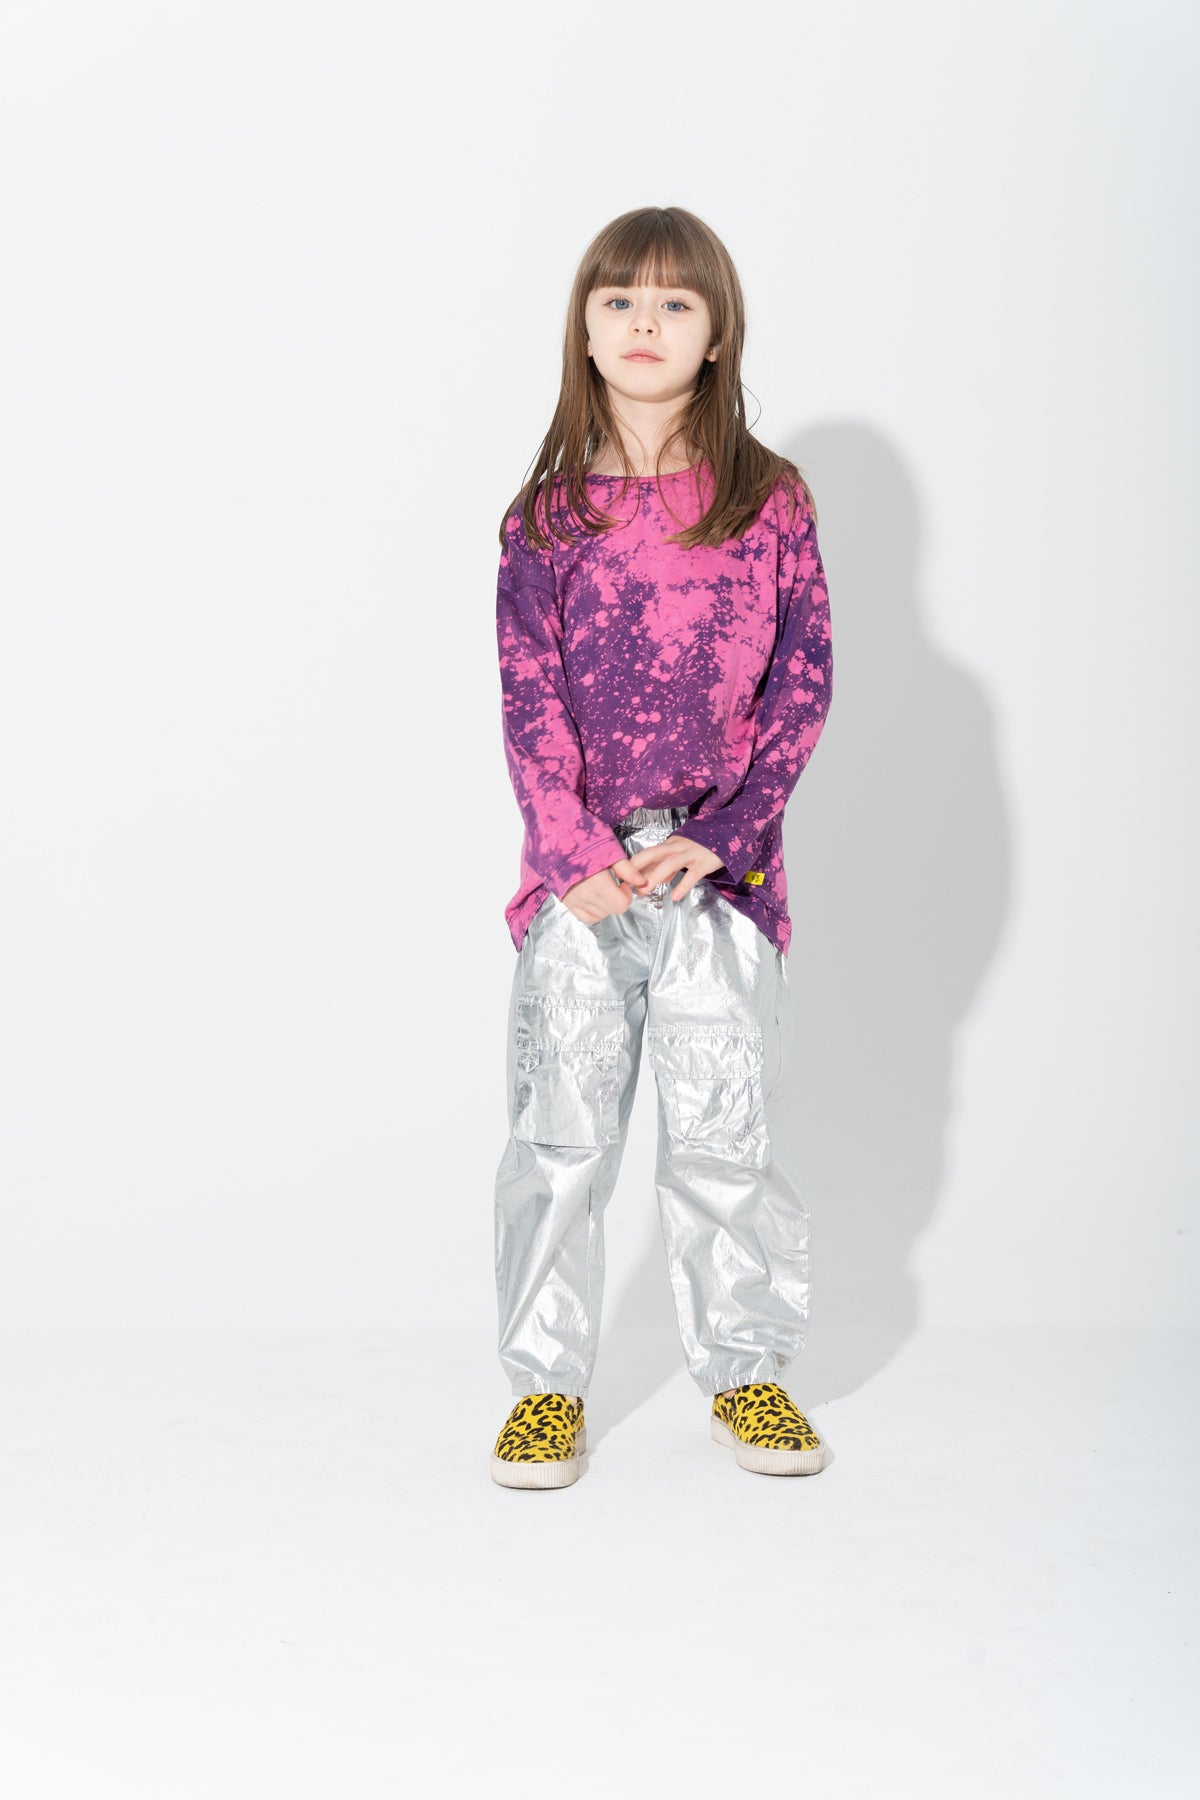 PURPLE AND PINK SPLATERED LONG SLEEVE TOP makids